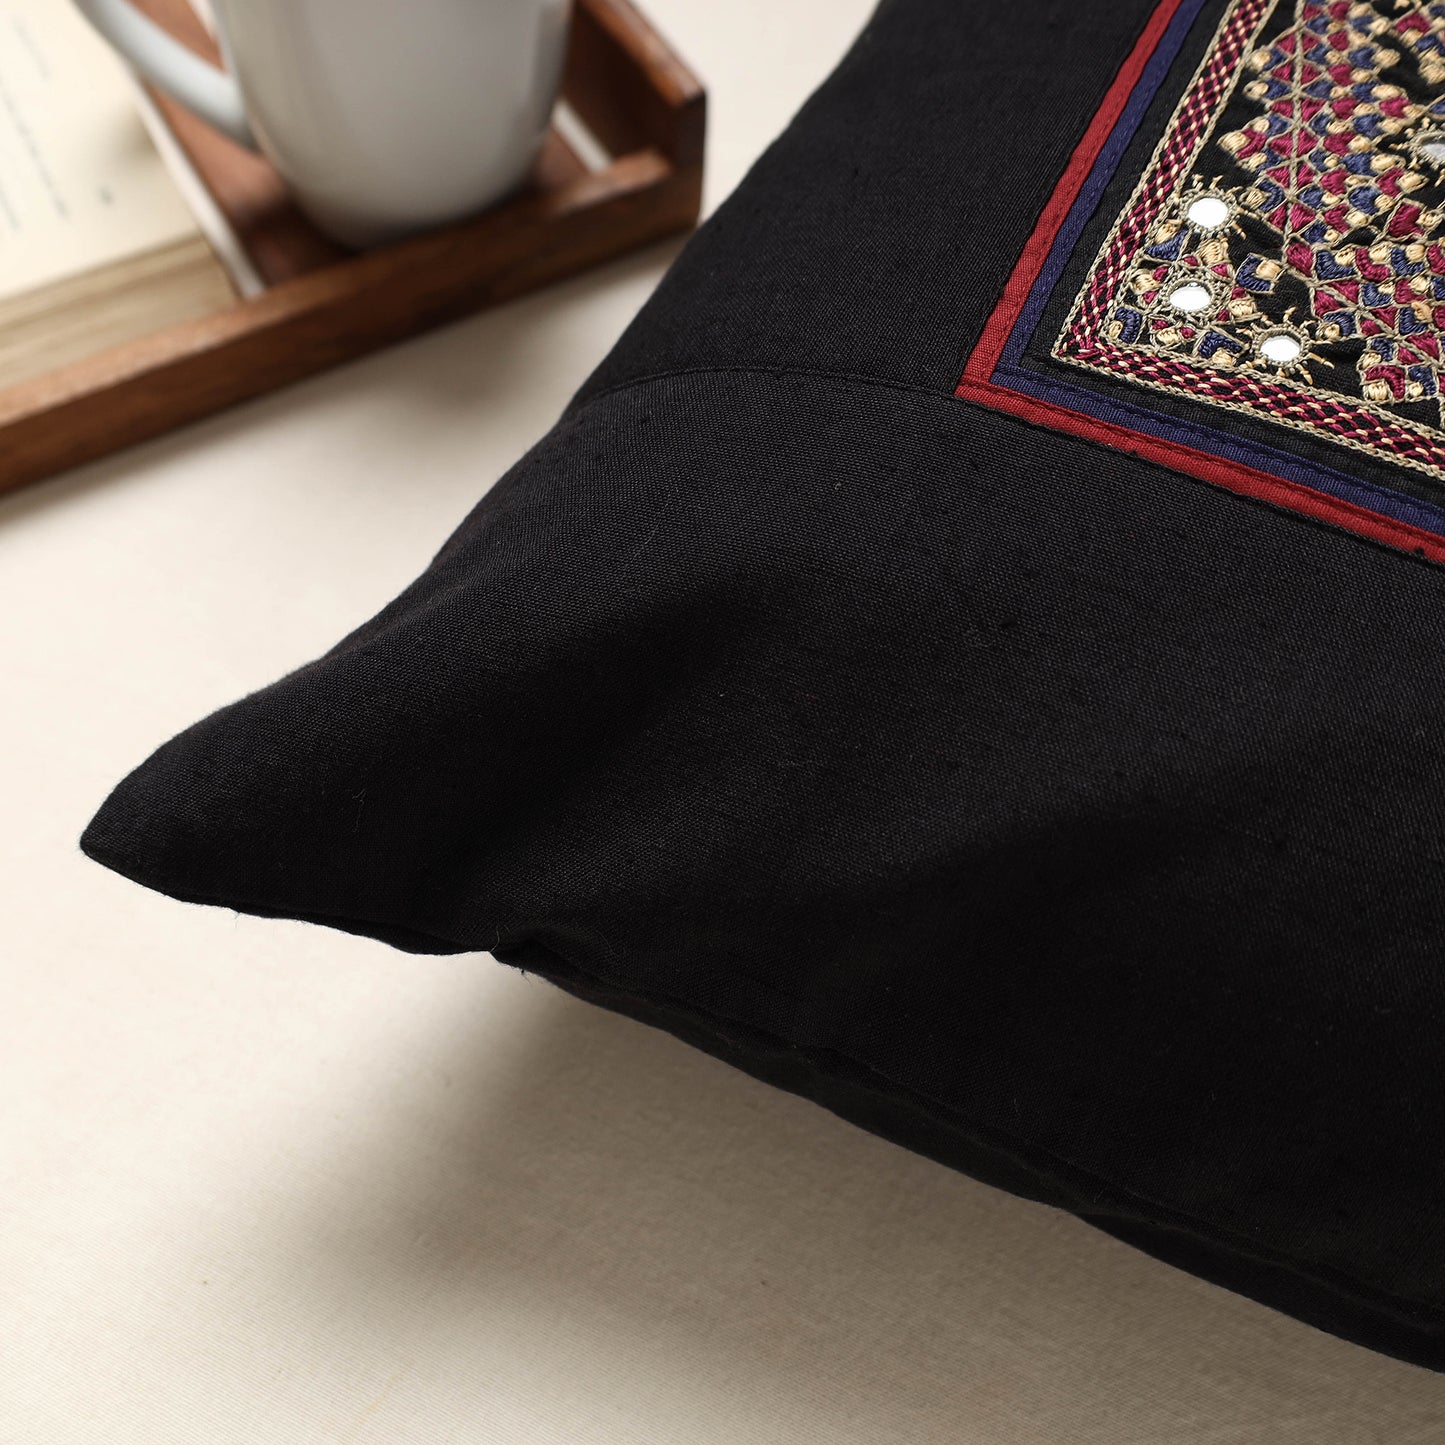 Black - Kutch Neran Hand Embroidery Cotton Cushion Cover (16 x 16 in)